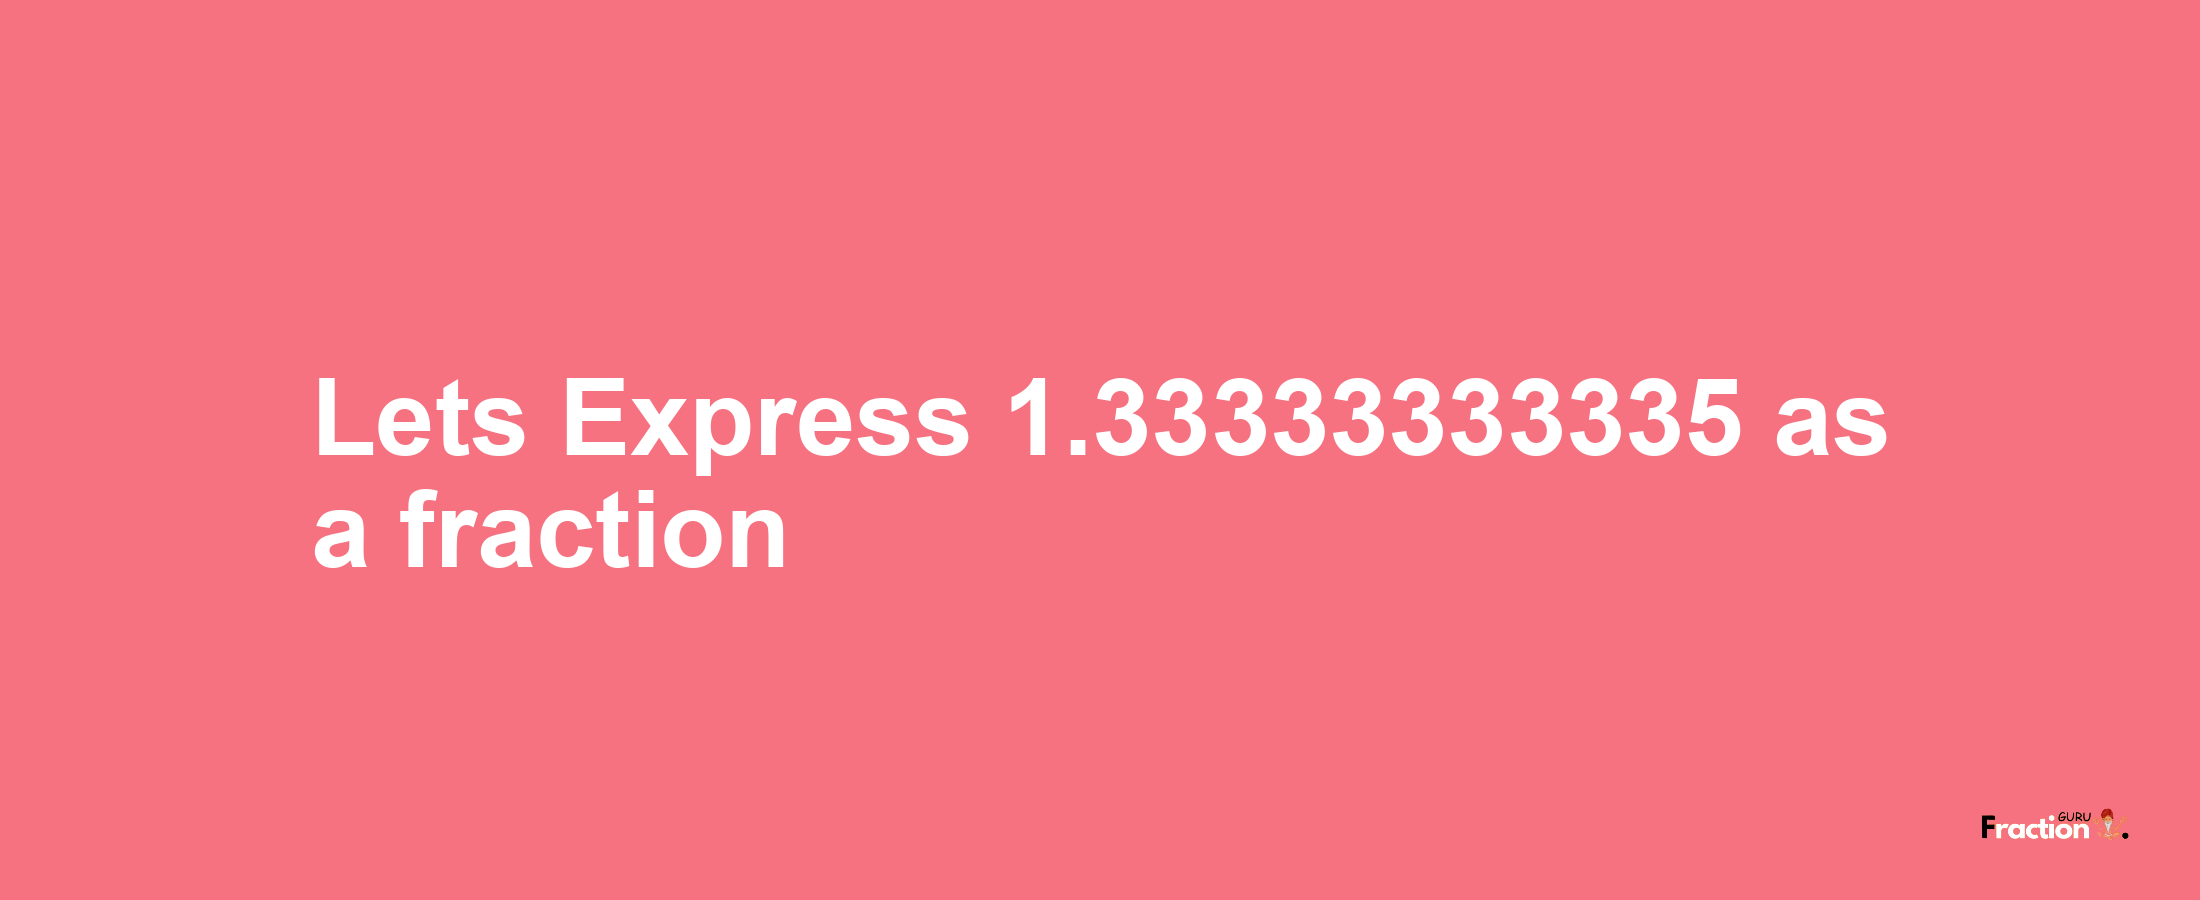 Lets Express 1.33333333335 as afraction